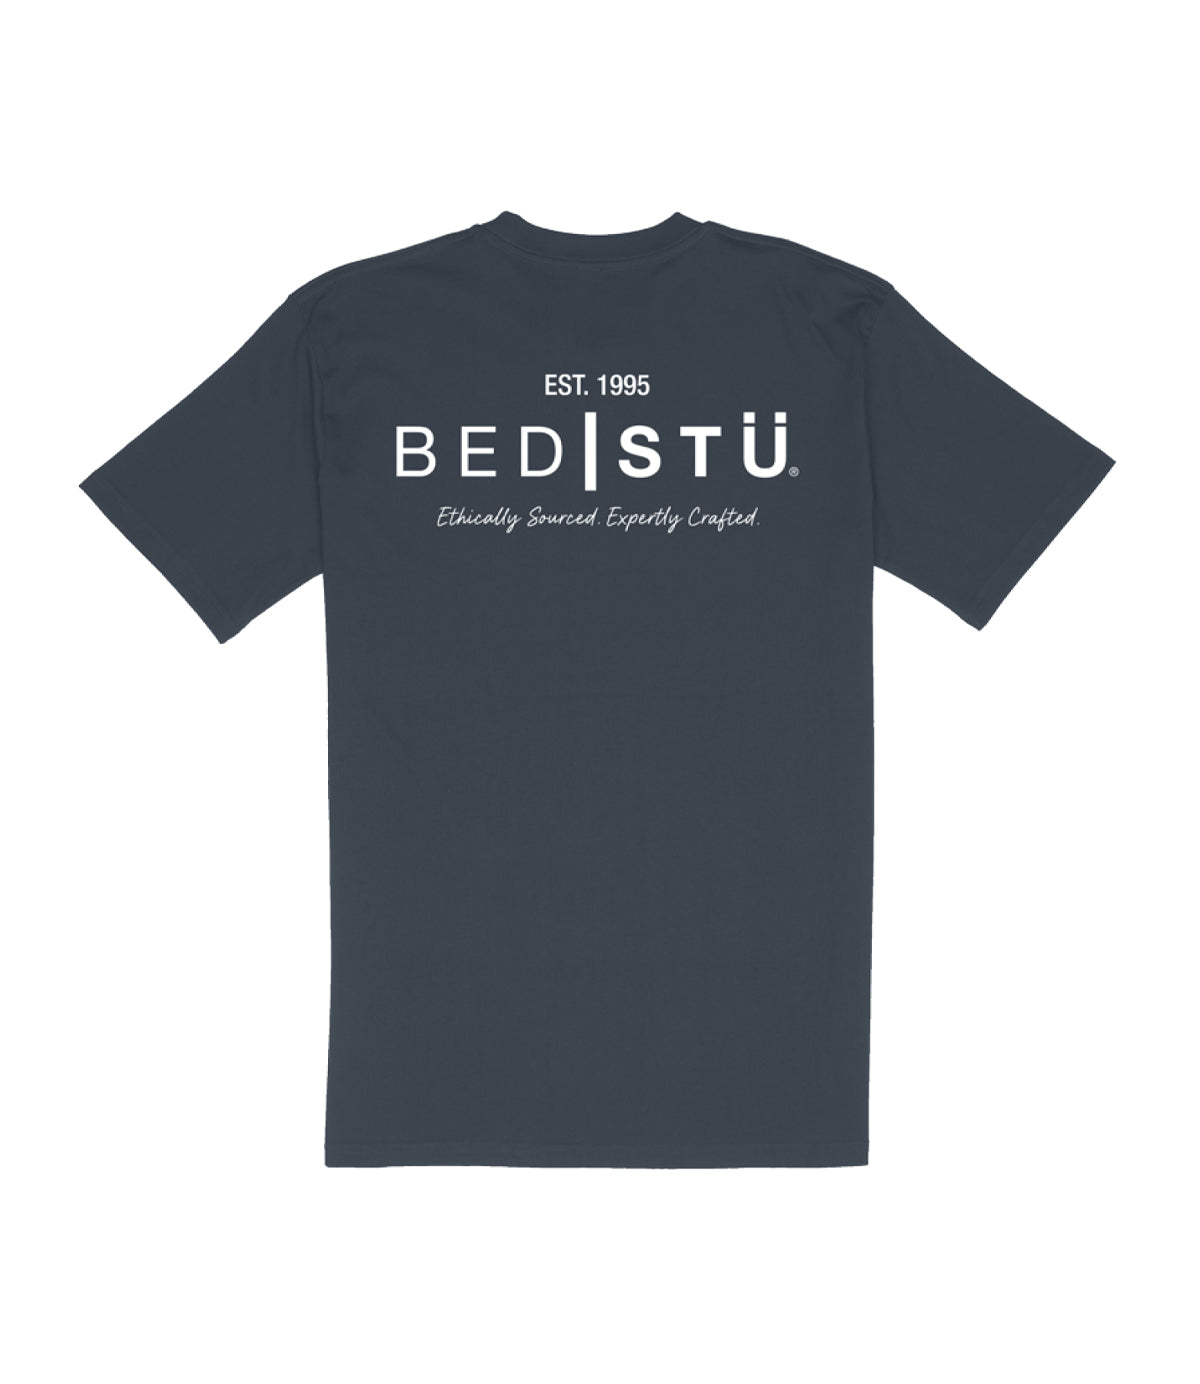 Plain dark Bed Stu Classic Tee shirt with "bedistu. est. 1995 sustainably and ethically sourced. expertly crafted." text printed on the back.